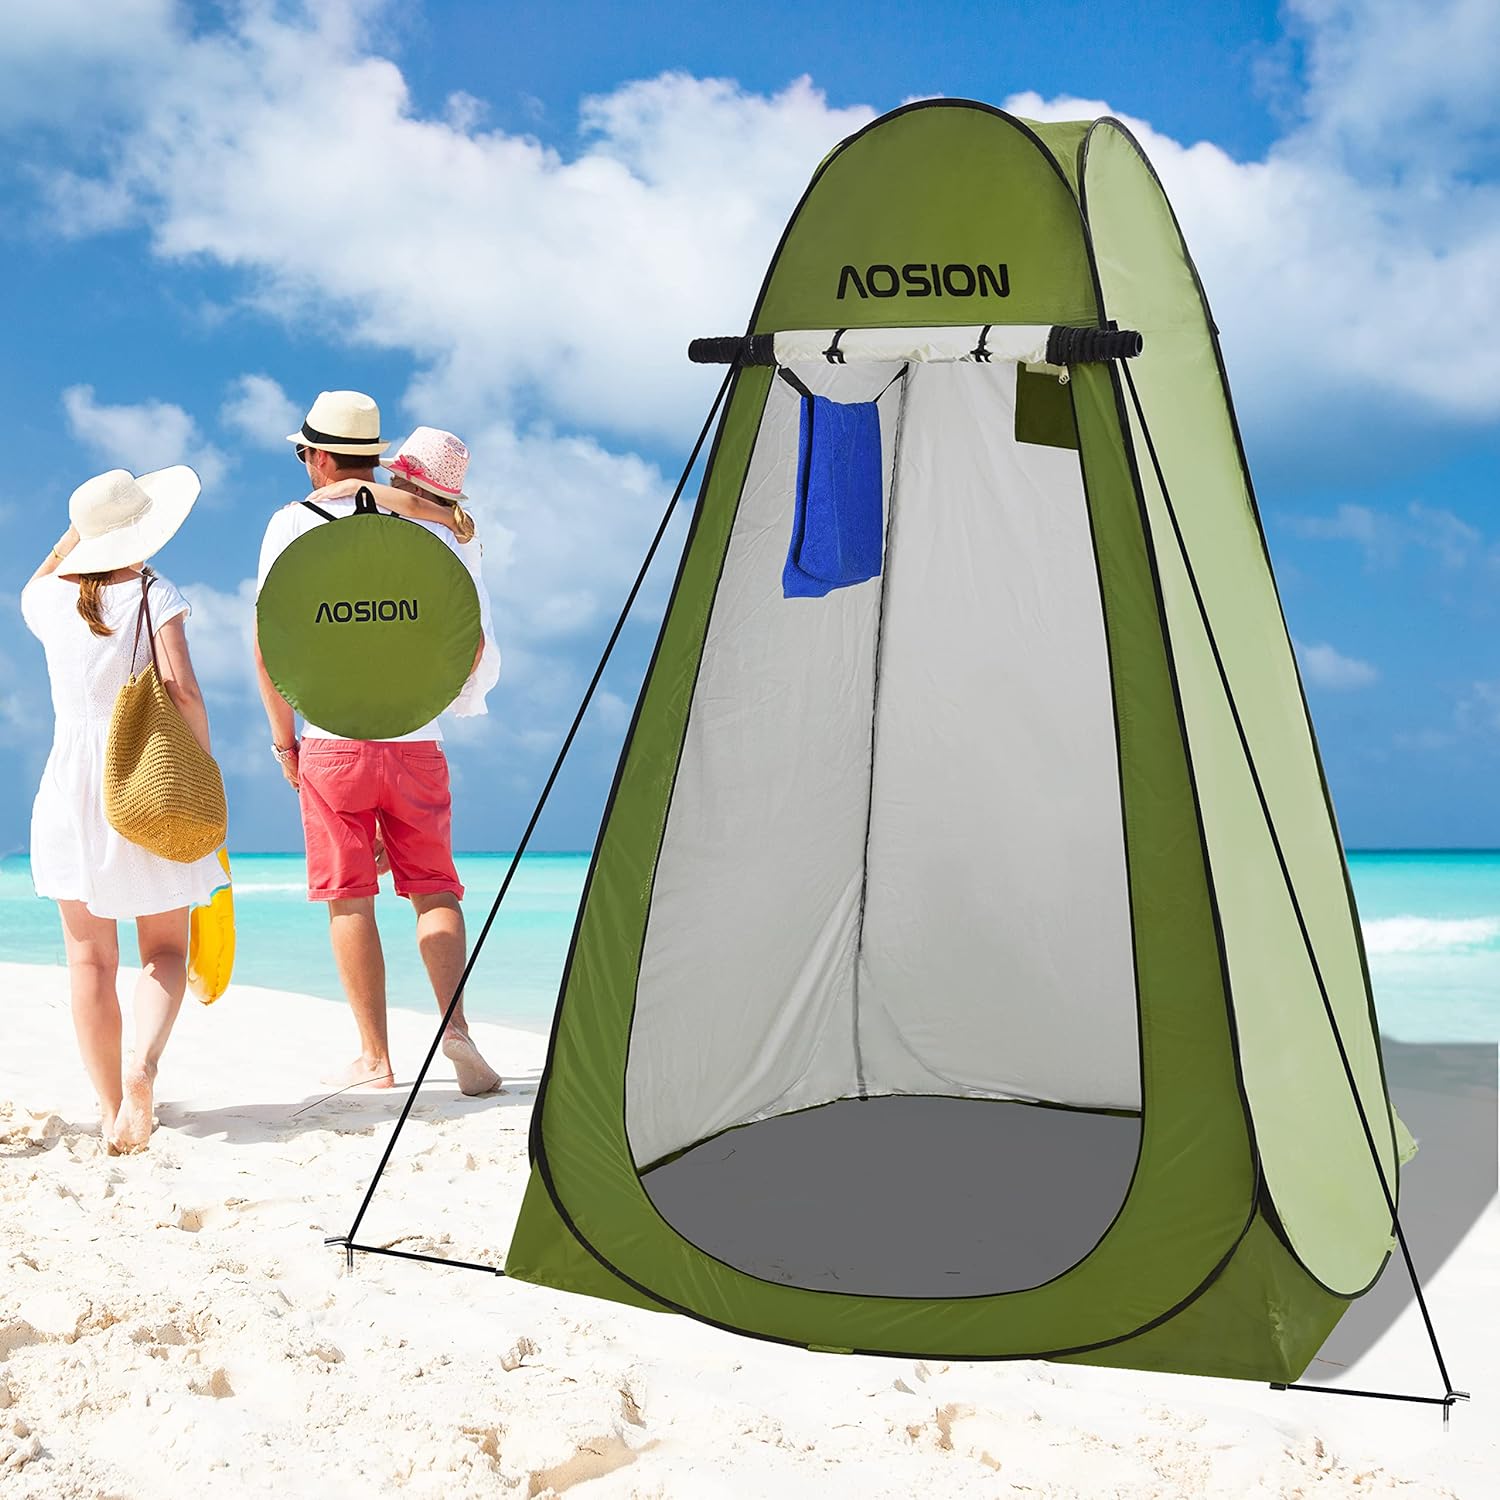 AOSION-Pop Up Changing Room Portable Shower Tent Review